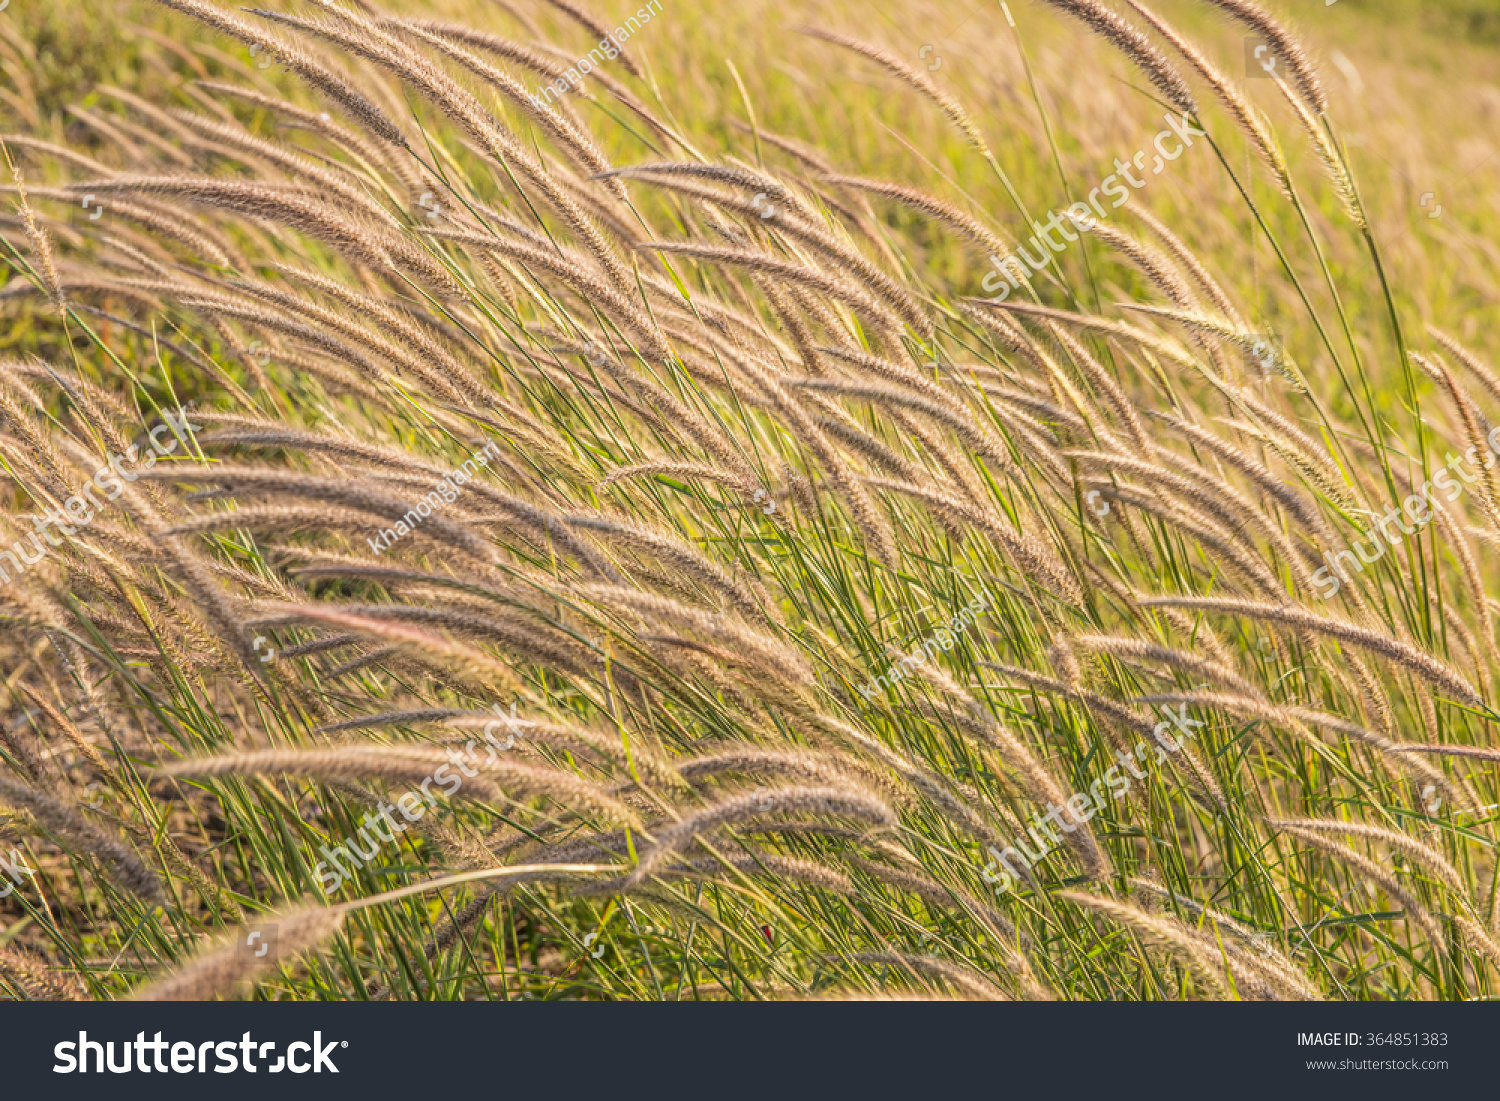 spring grass in sun light and defocus sky on background #364851383